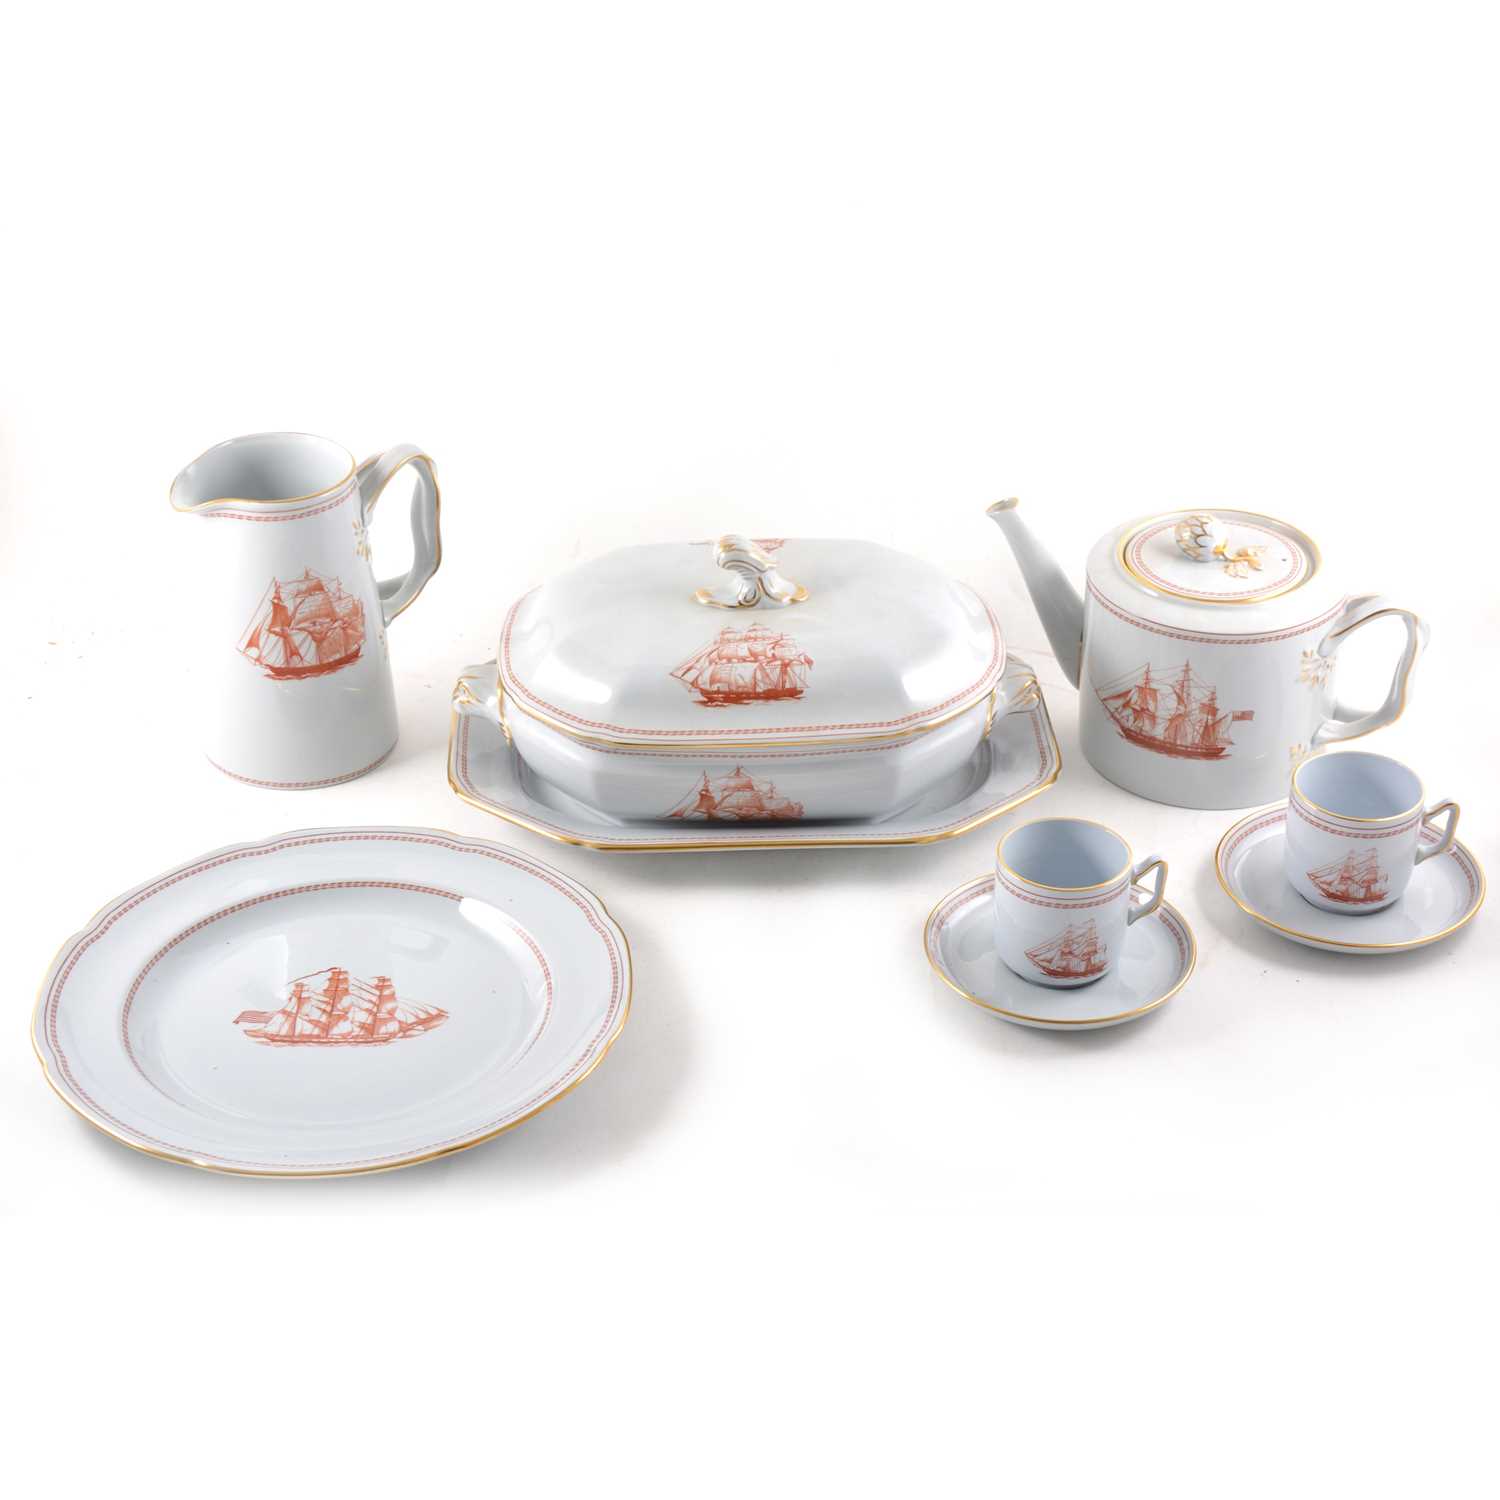 Lot 79 - An extensive Spode stone china table service, Trade Winds